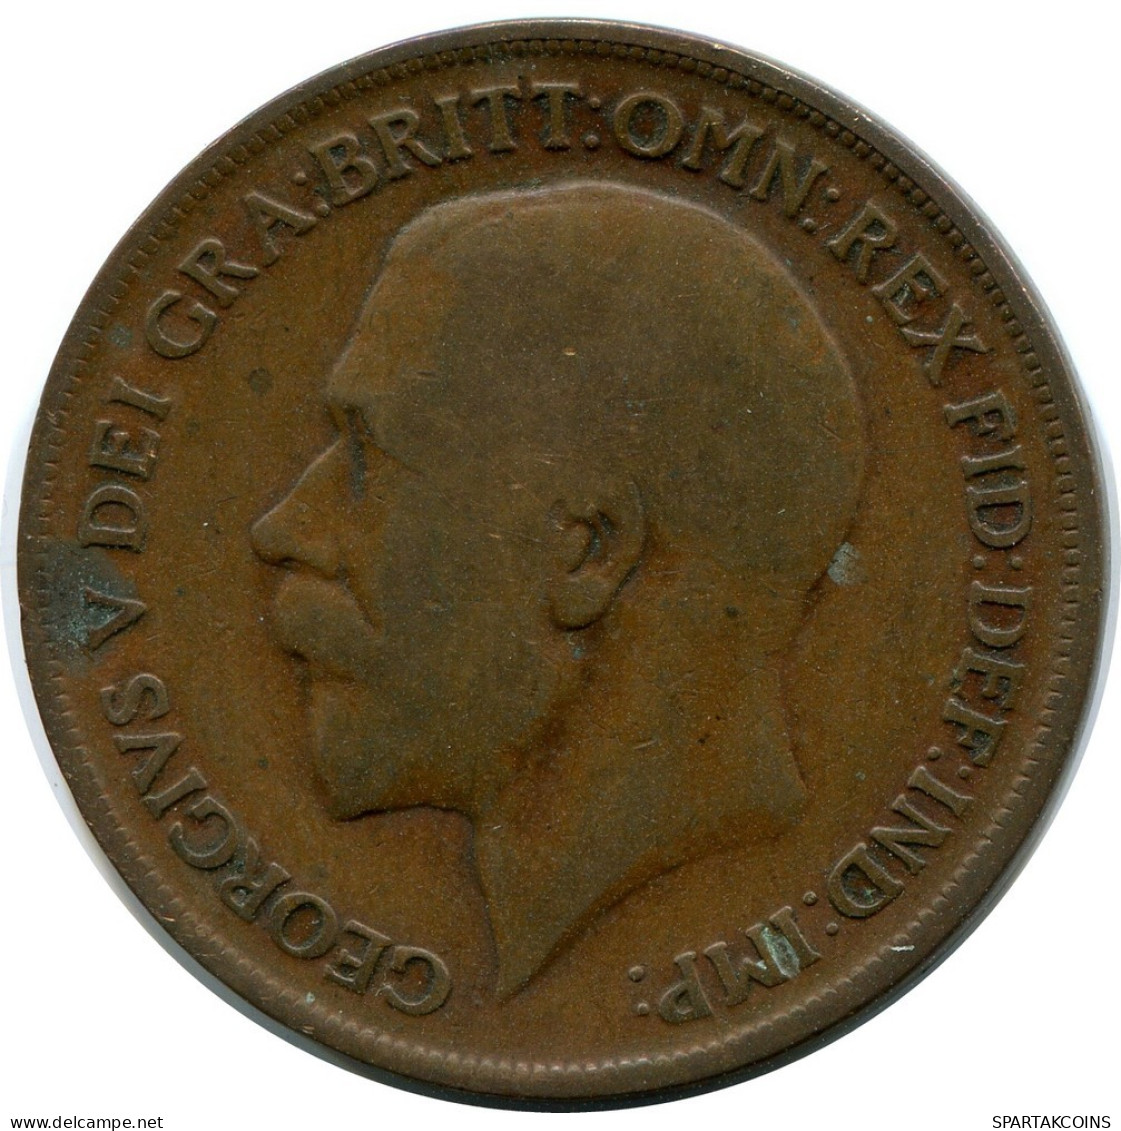 PENNY 1913 UK GREAT BRITAIN Coin #BB007.U.A - D. 1 Penny